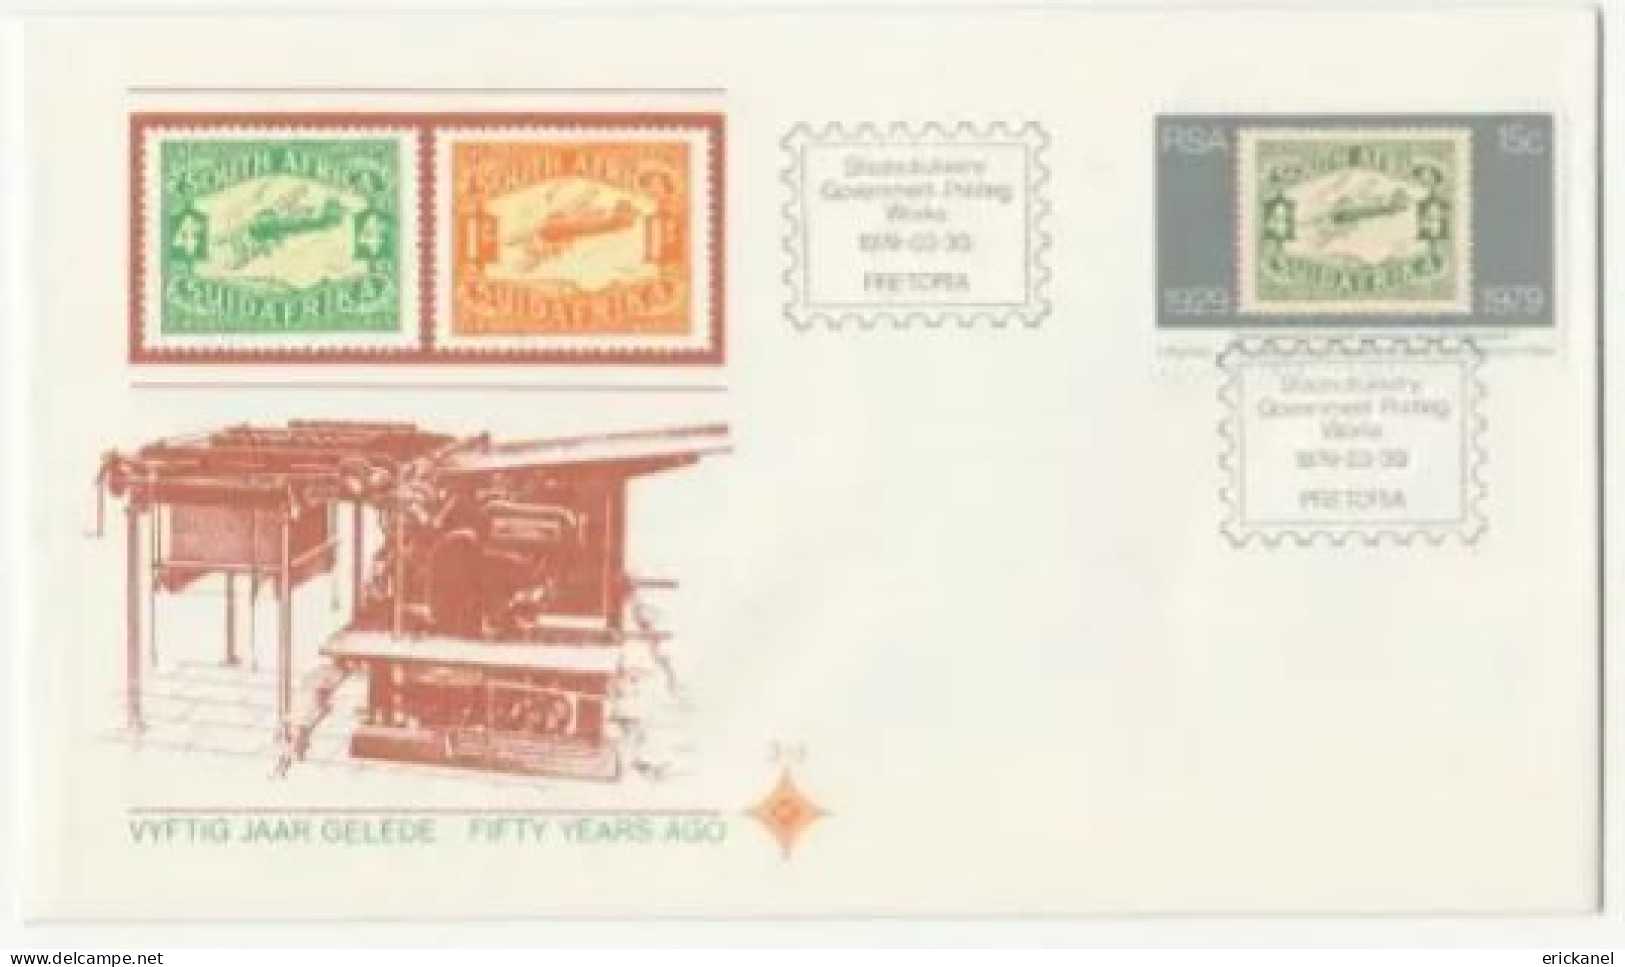 1979 SOUTH AFRICA Stamp Printing In South Africa FDC 3.13 - FDC